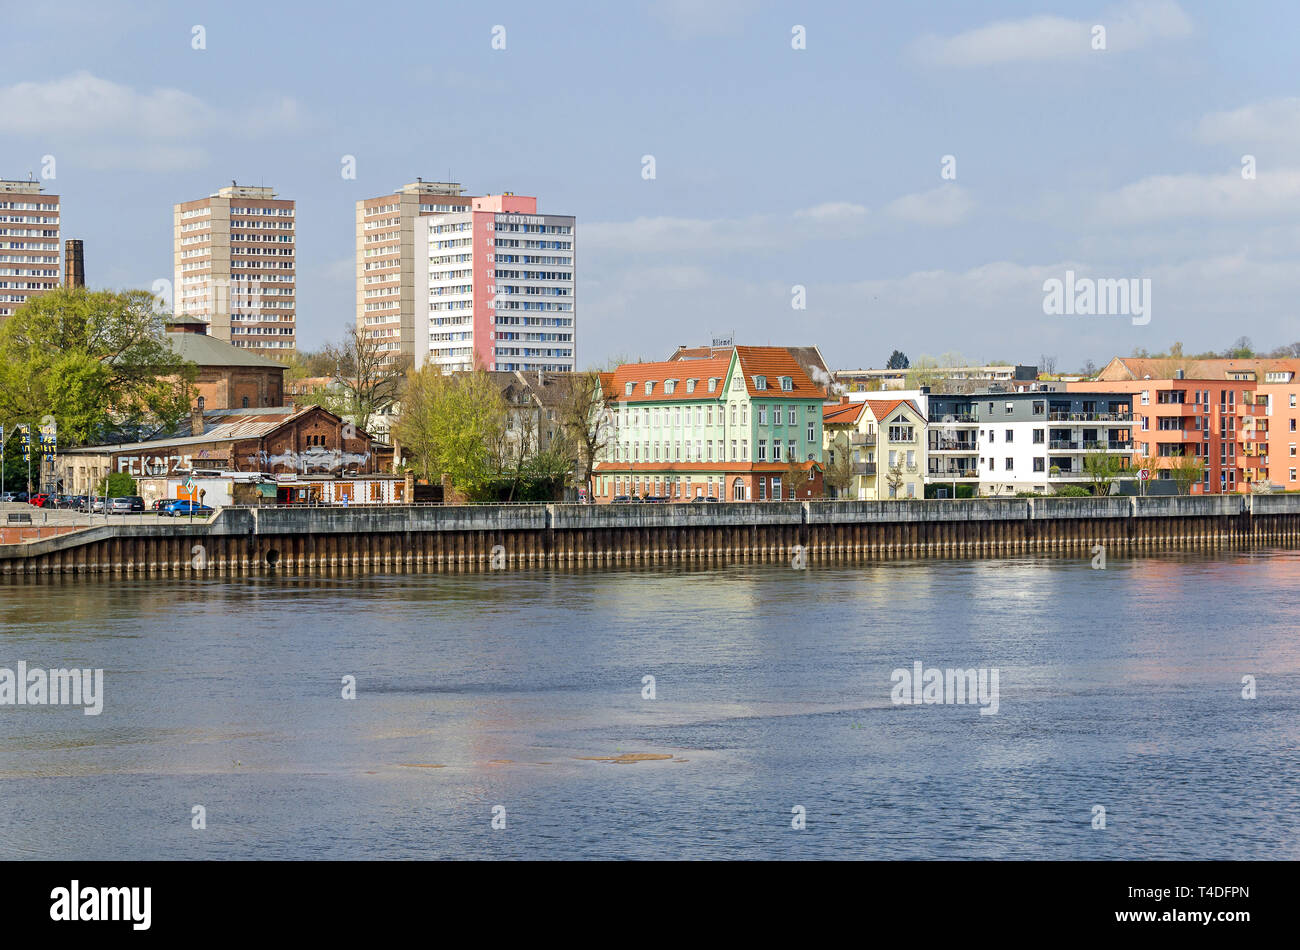 Frankfurt (Oder), Germany - April 9, 2019: Banks of the Oder River and the northern river front with old and modern residential buildings and the hist Stock Photo